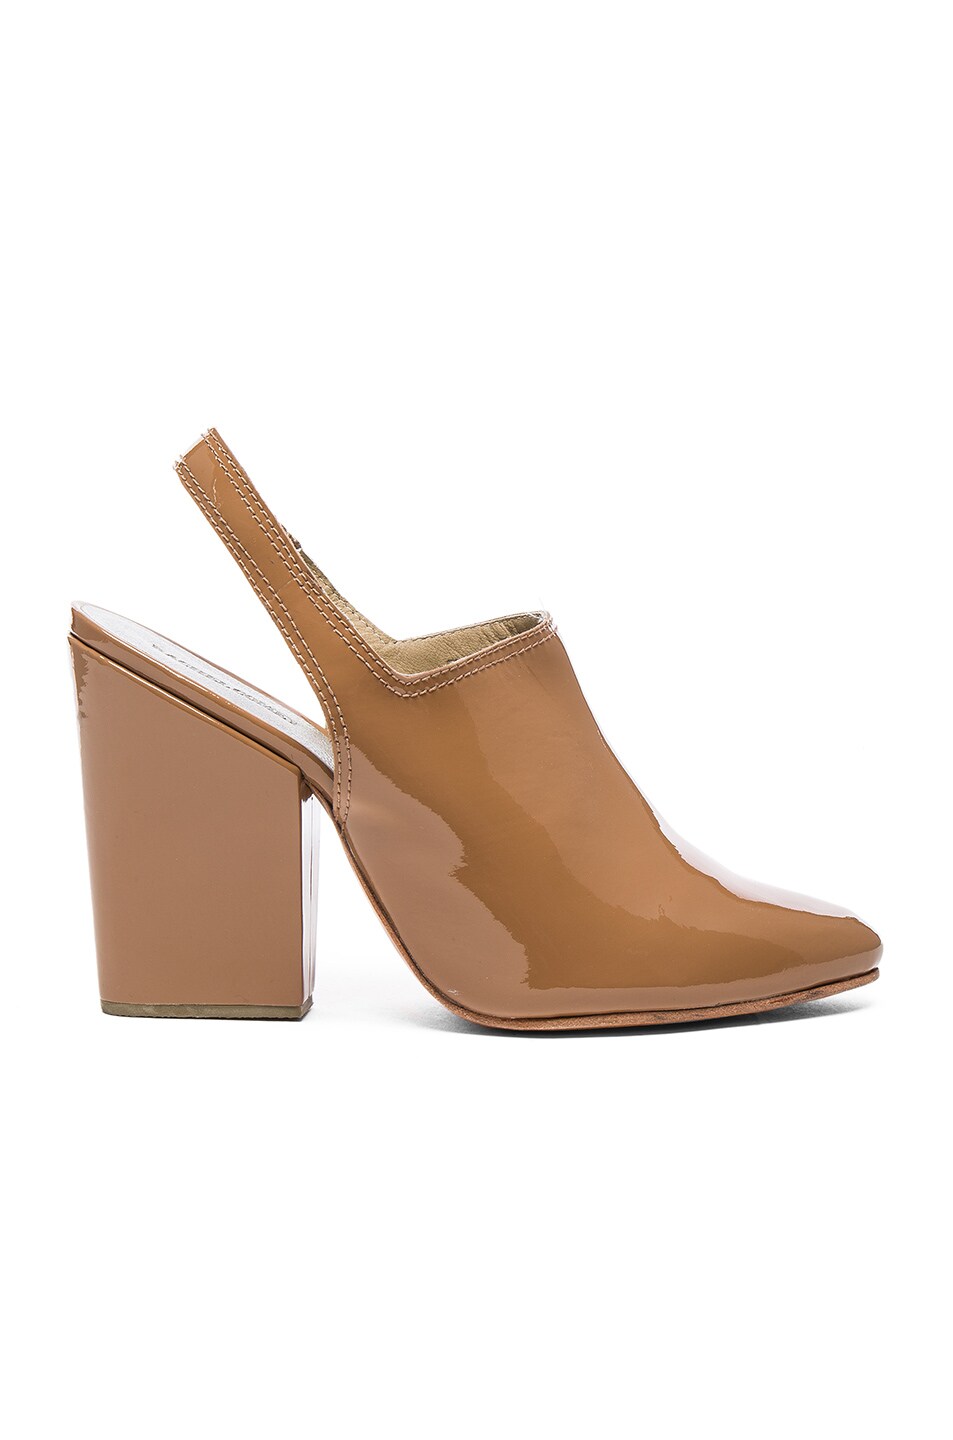 Image 1 of Rachel Comey Patent Leather Kai Heels in Toffee Patent